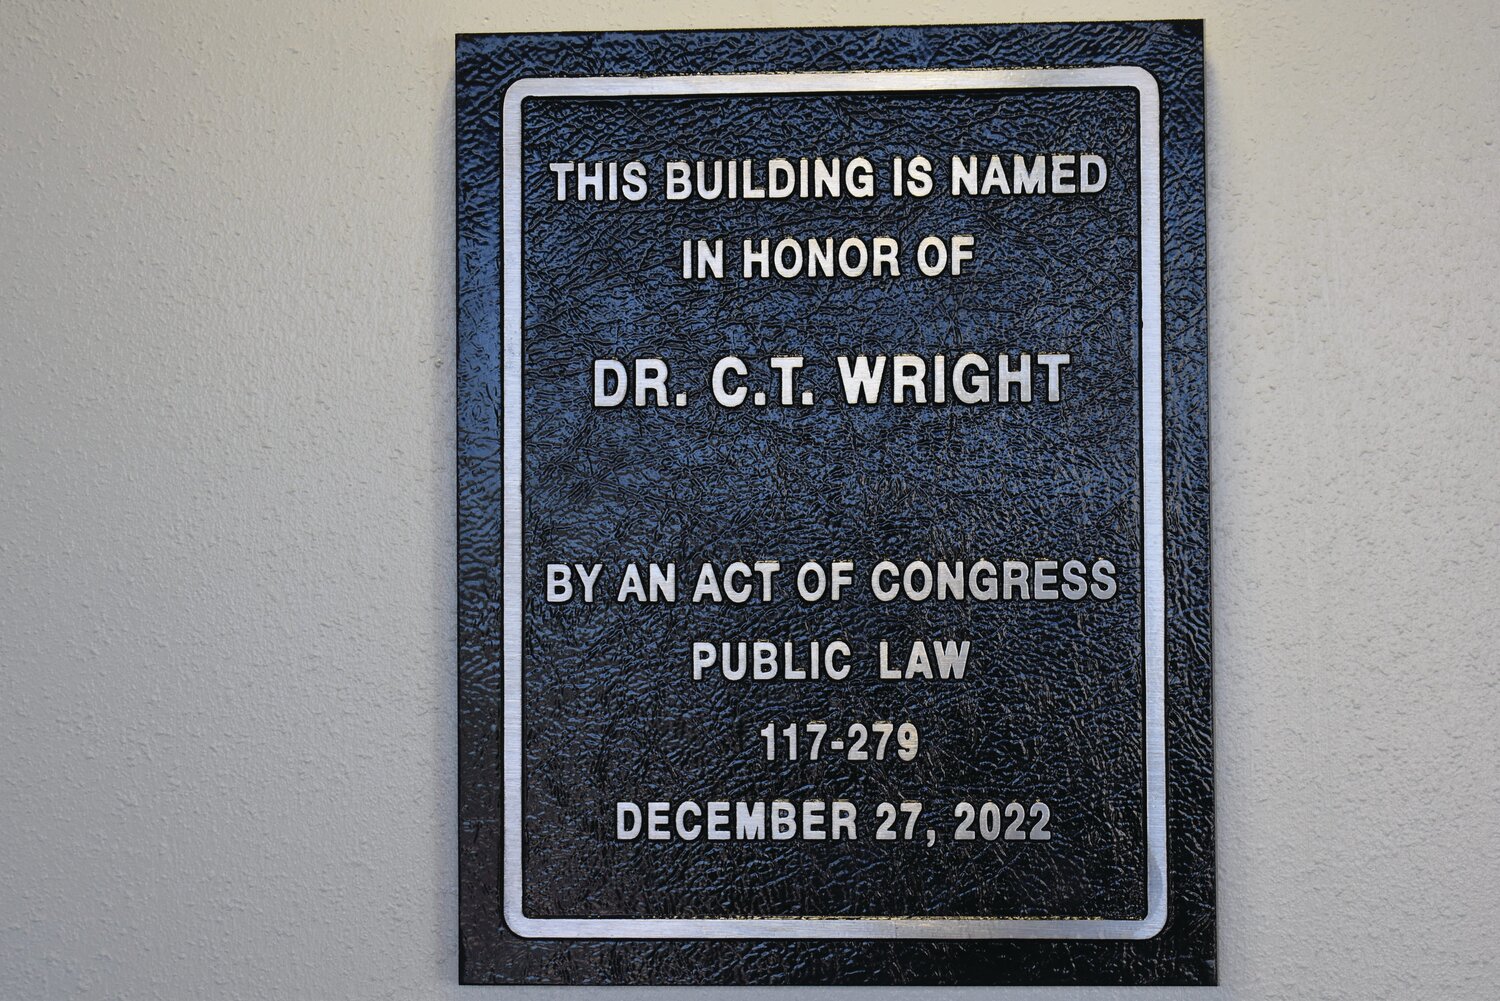 This new plaque hangs on the wall inside the Post Office entrance.